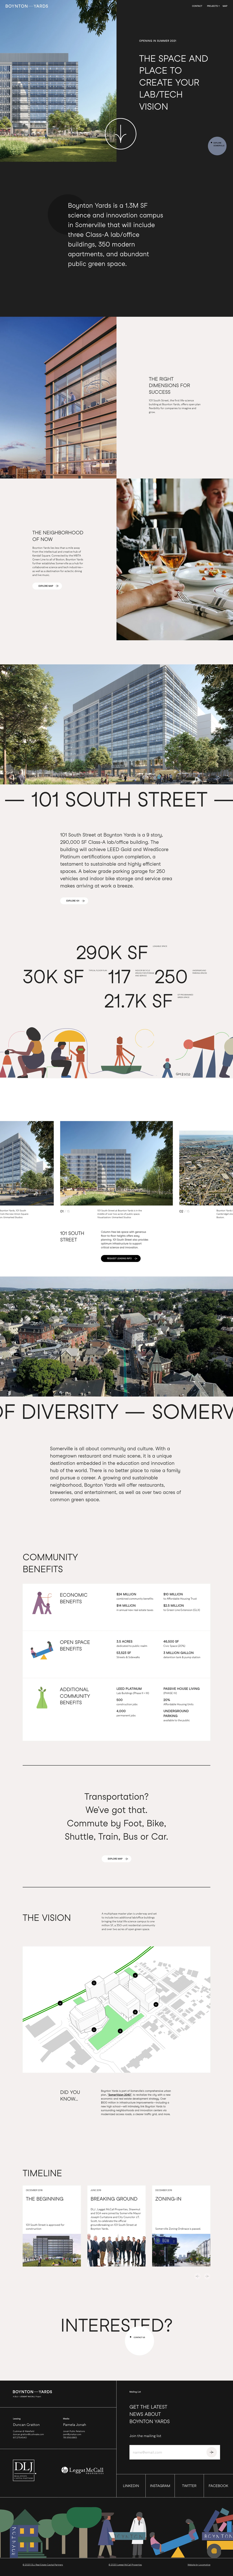 Boynton Yards Landing Page Example: Boynton Yards is a 1.3M SF science and innovation campus in Somerville that will include three Class-A lab/office buildings, 350 modern apartments, and abundant public green space.